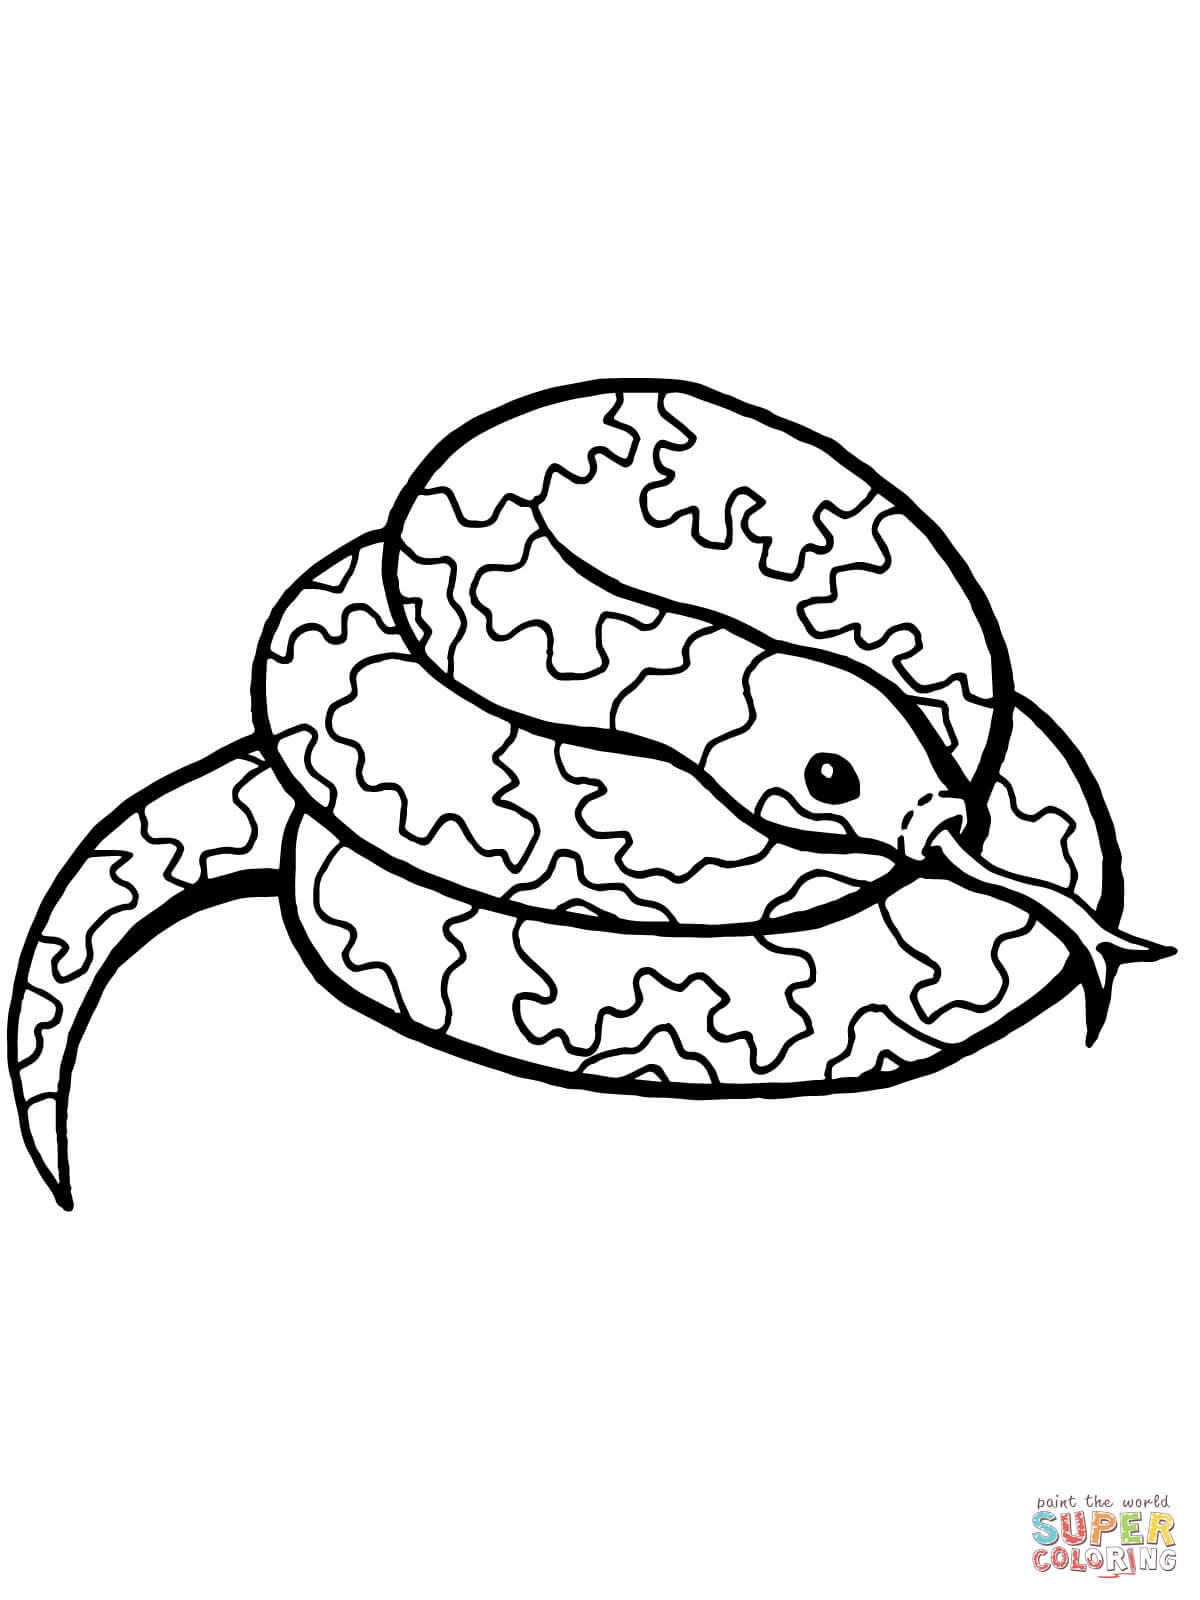 Coiled snake coloring page free printable coloring pages